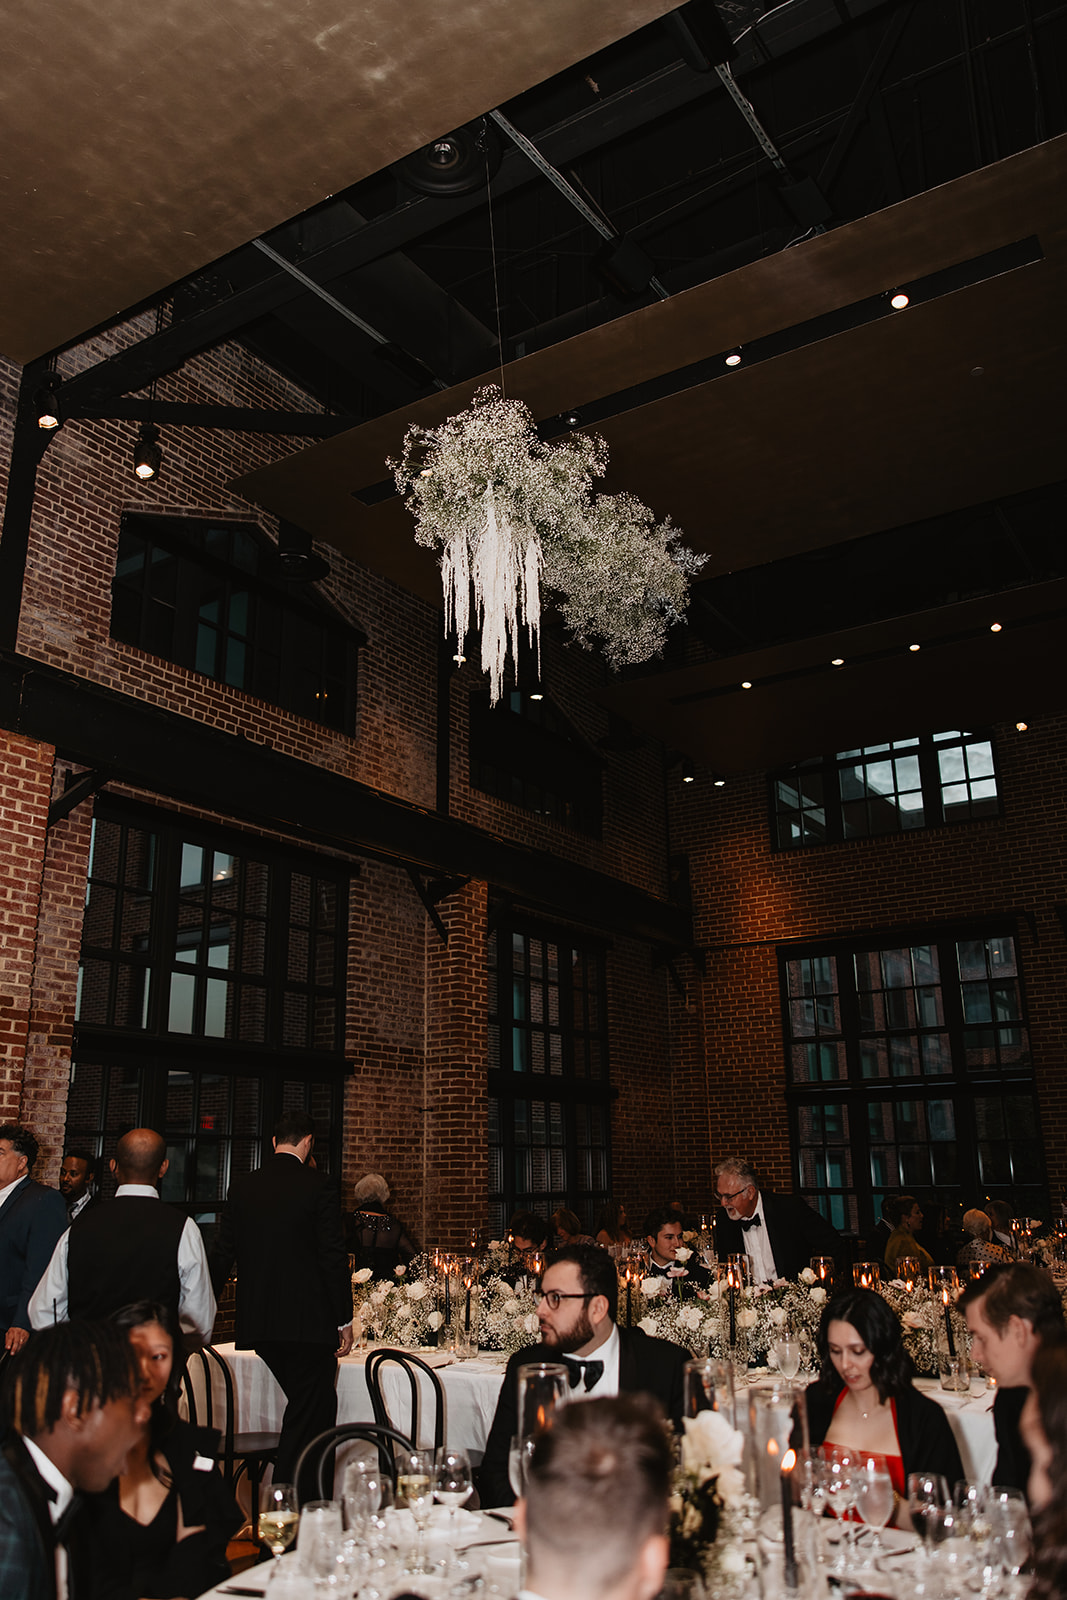 the elegance and decor of the wedding reception venue